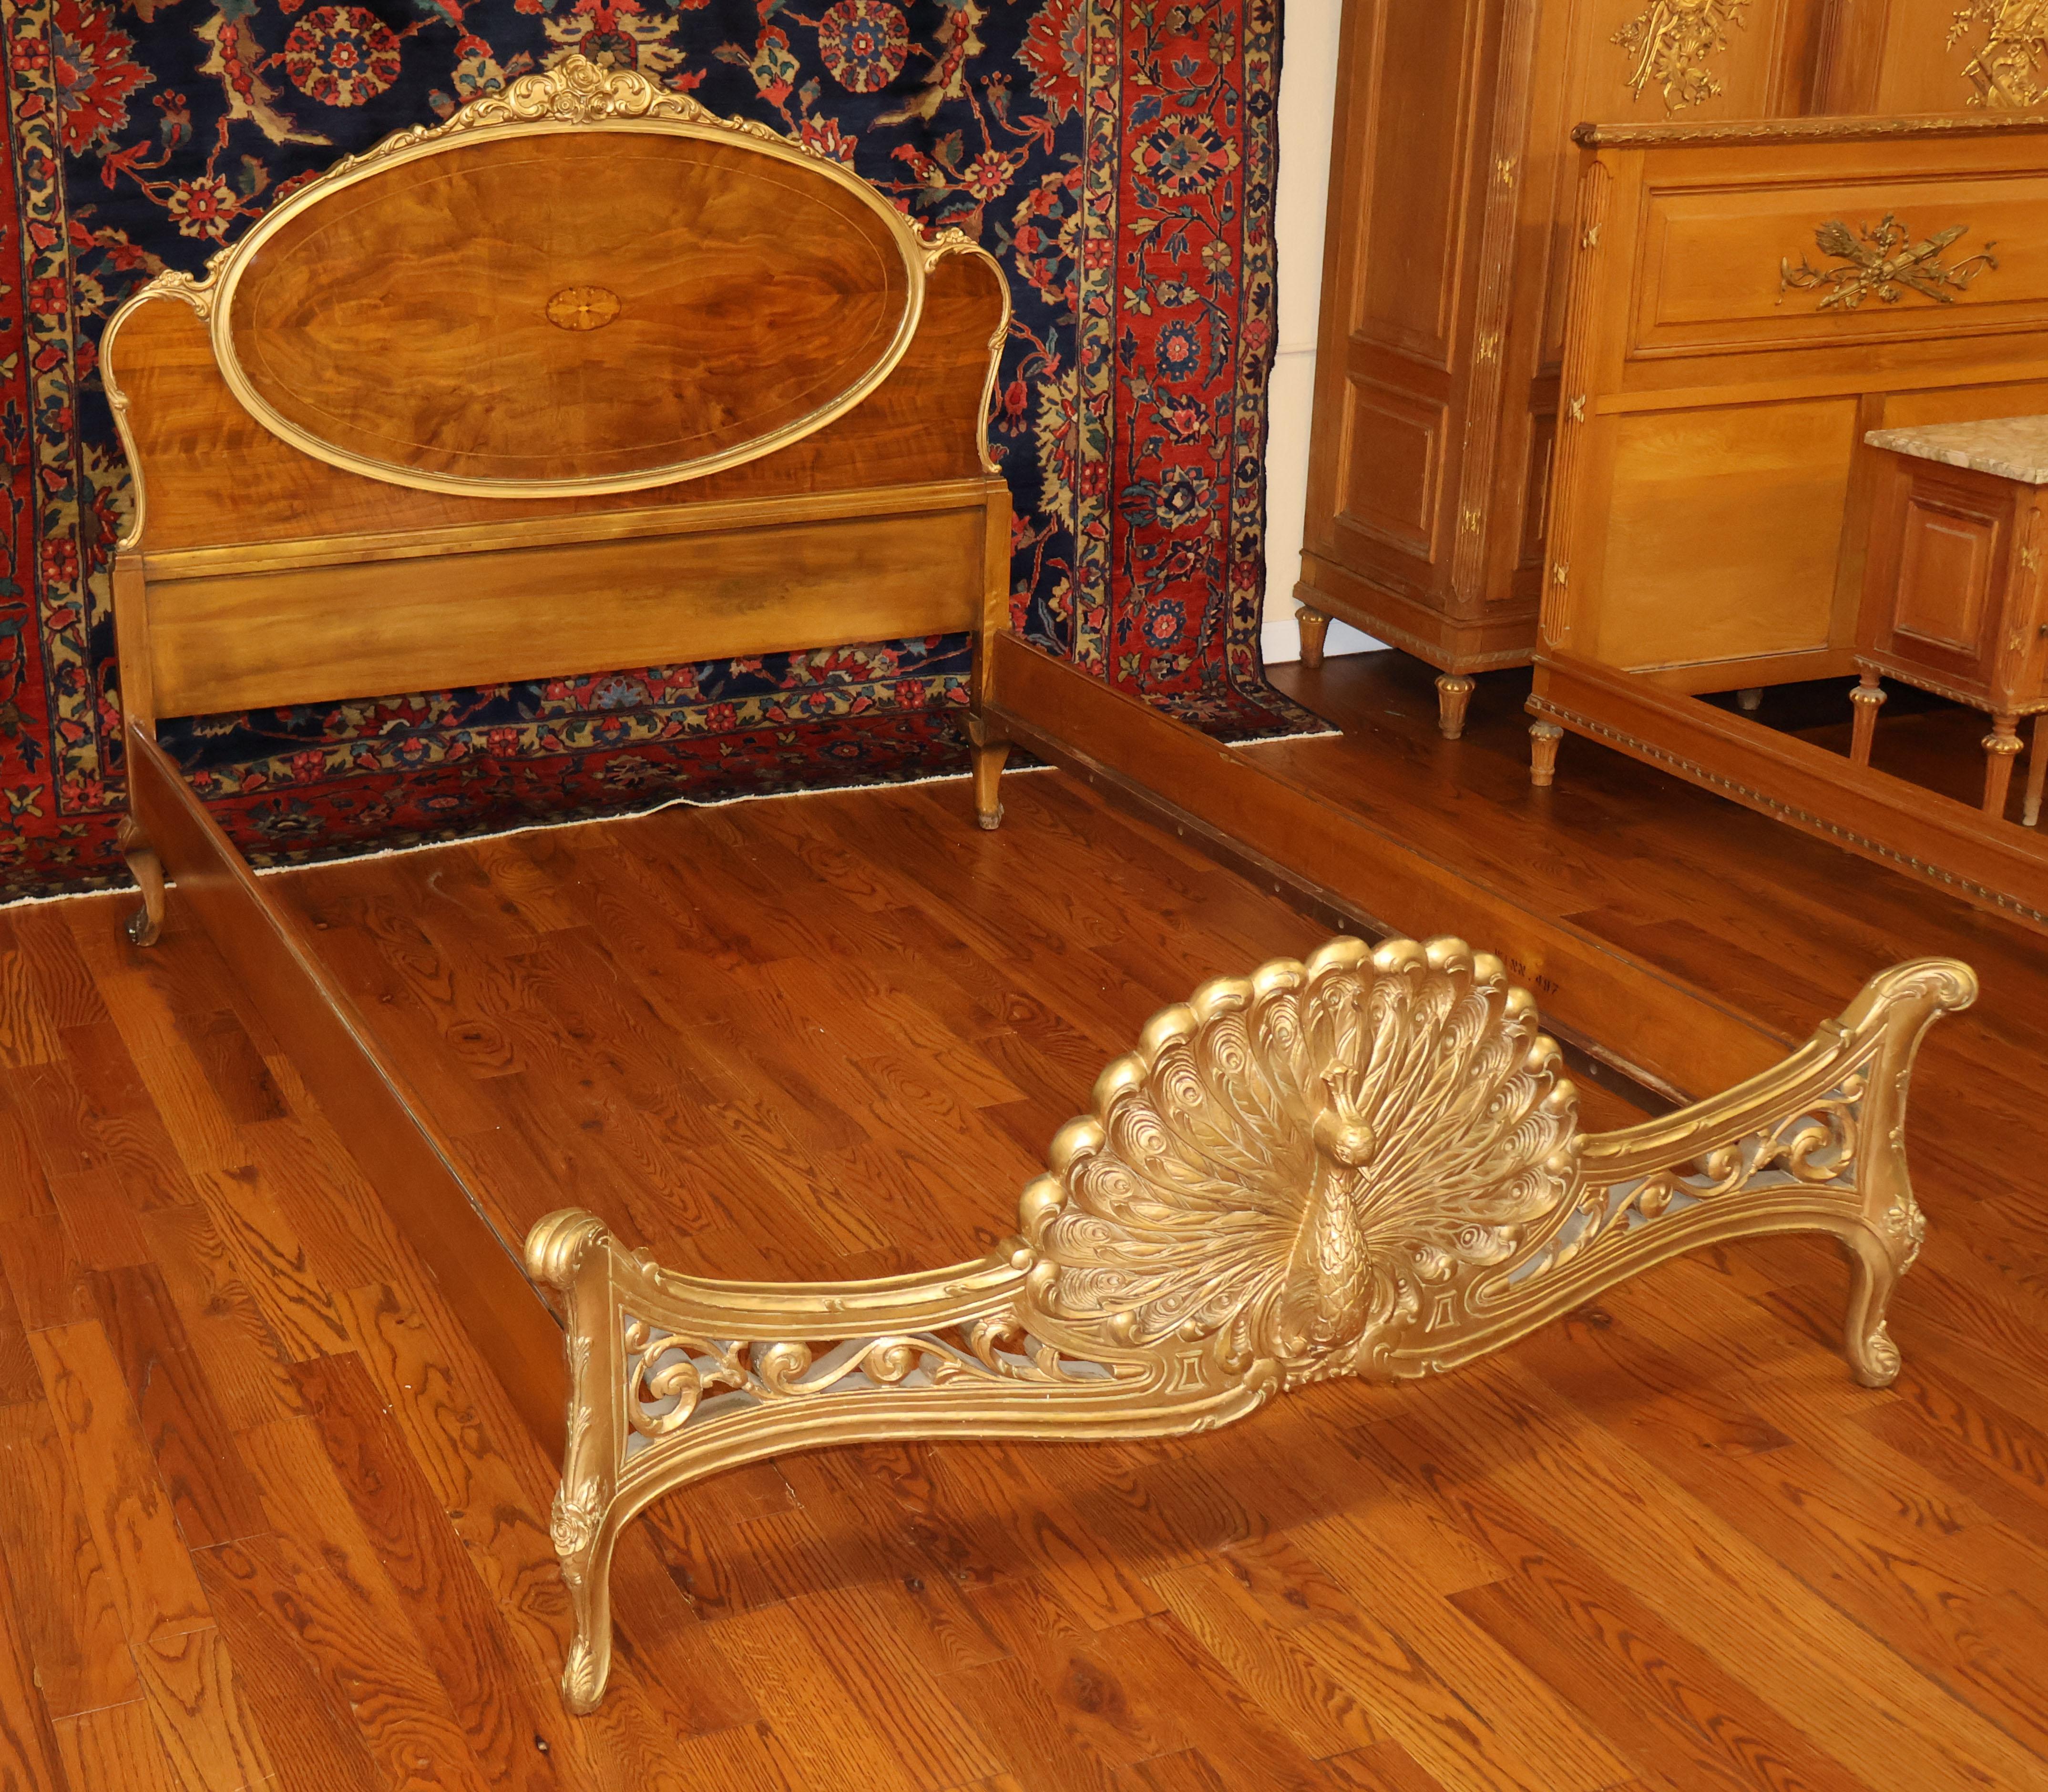 ​Gorgeous French Louis XVI Style Inlaid Burled Wood Peacock Carved Full Bed

Dimensions : 56.5